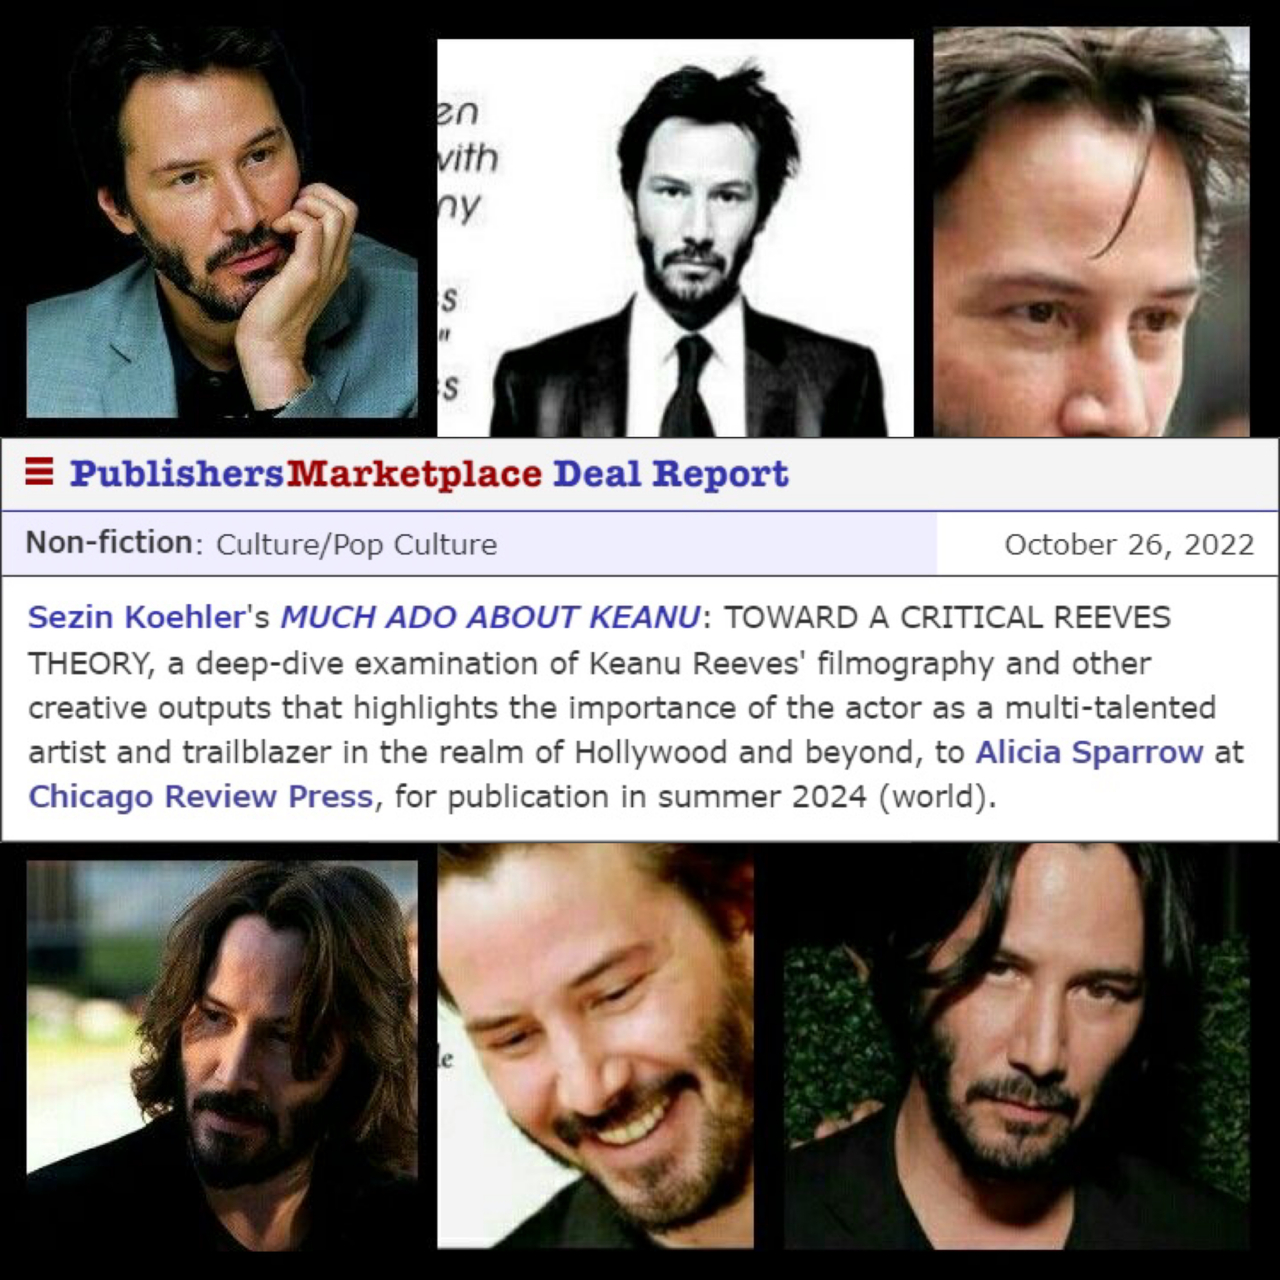 Much Ado About Keanu: The Newsletter